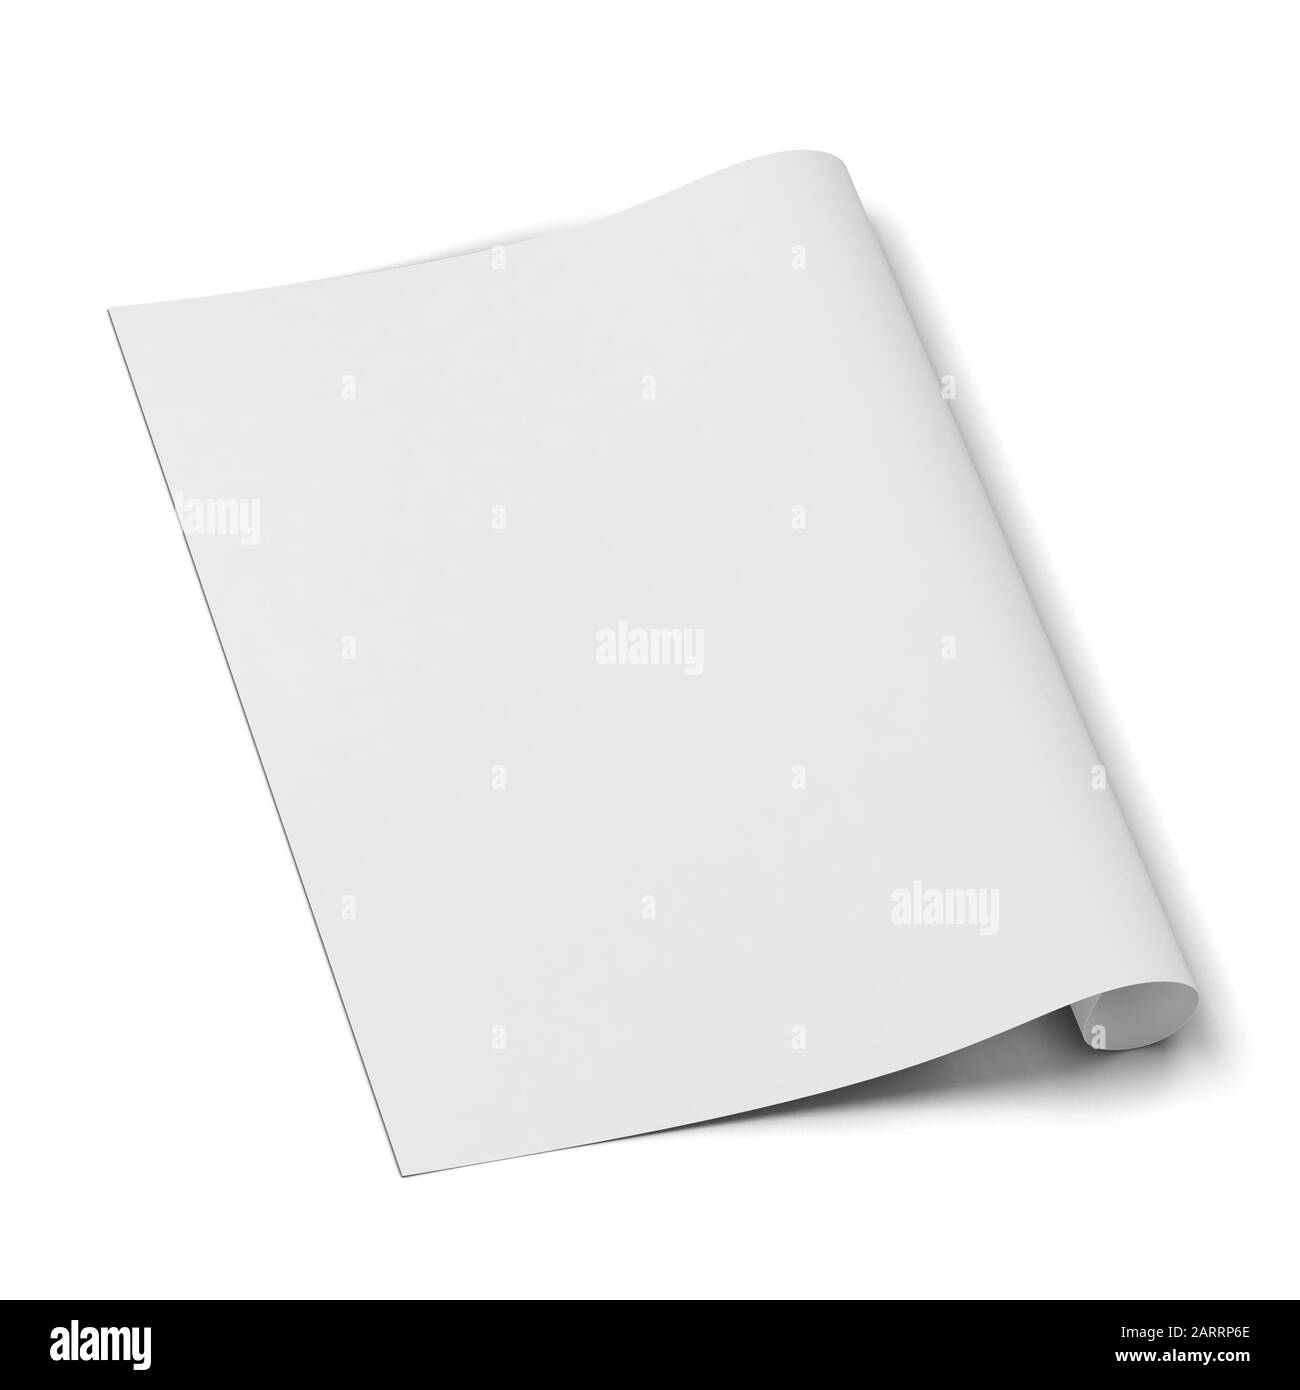 Paper canvas print sheet mockup. 3d illustration isolated on white background Stock Photo